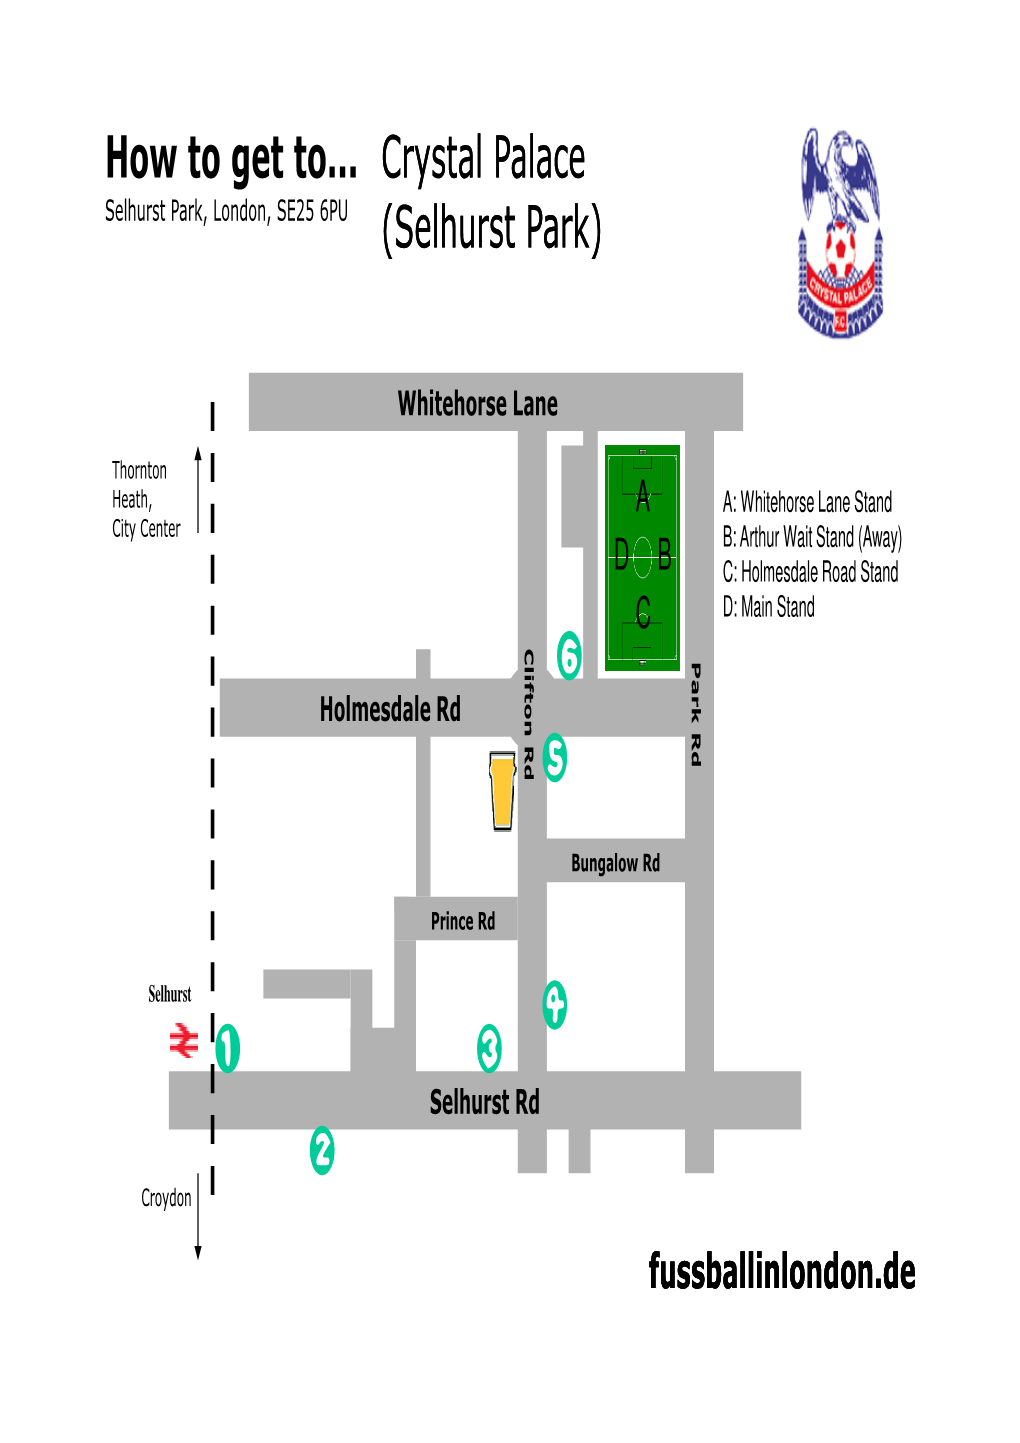 How to Get To... Crystal Palace (Selhurst Park)